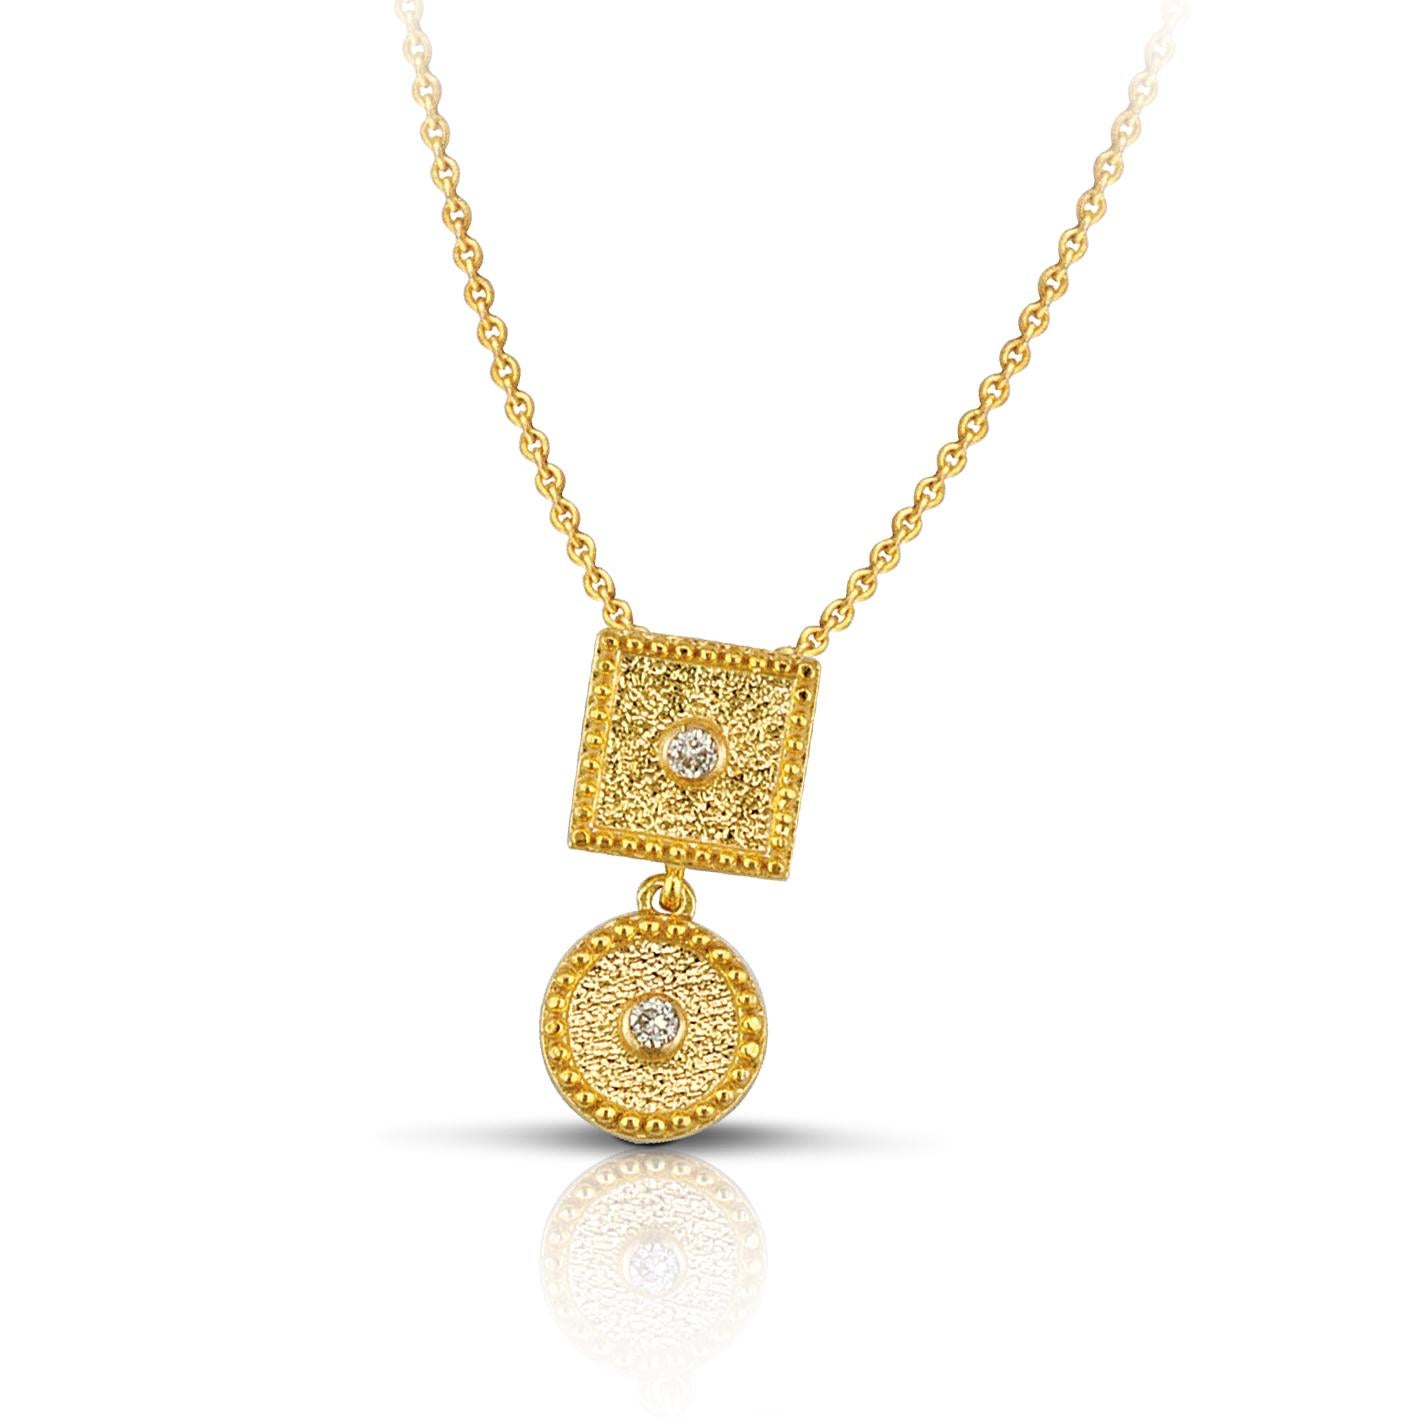 S.Georgios Design drop Pendant is all handmade from solid 18 Karat Yellow Gold and is microscopically decorated with granulation work all the way around. The background of the pendant has a unique velvet look and features 2 Brilliant cut Diamonds